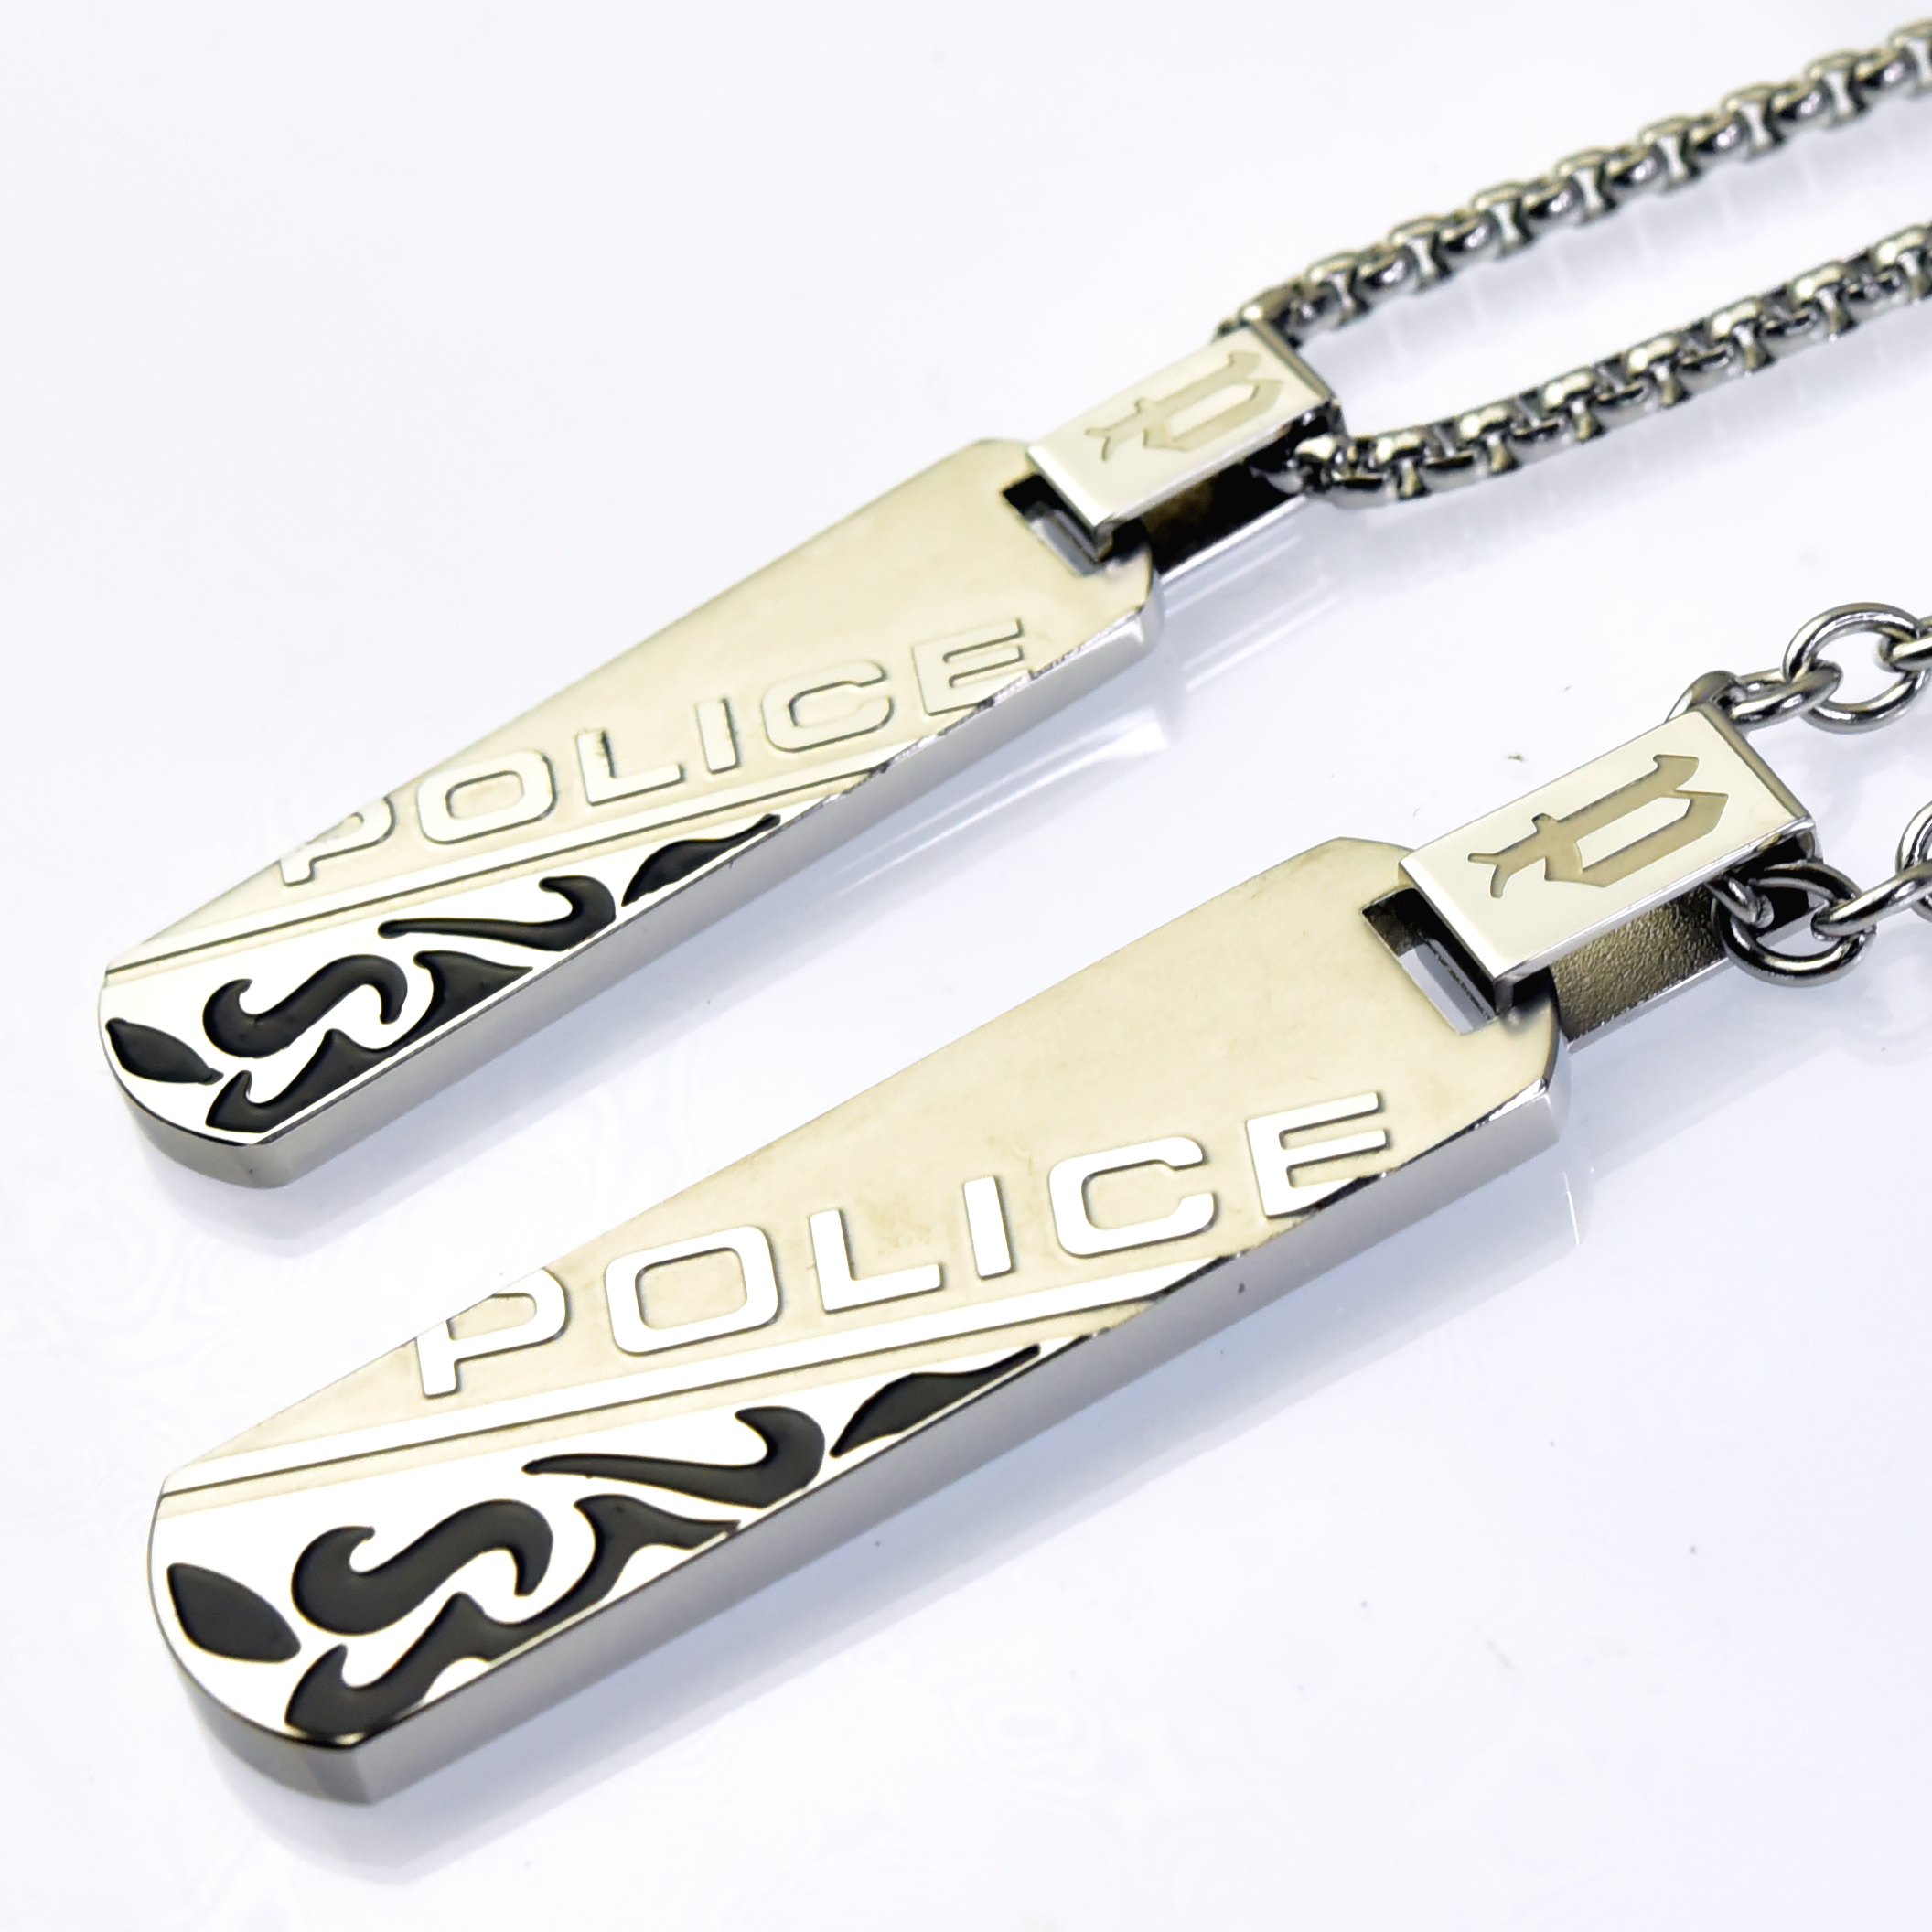 http://www.police.ne.jp/images/police_necklace_duality_pair_01.jpg